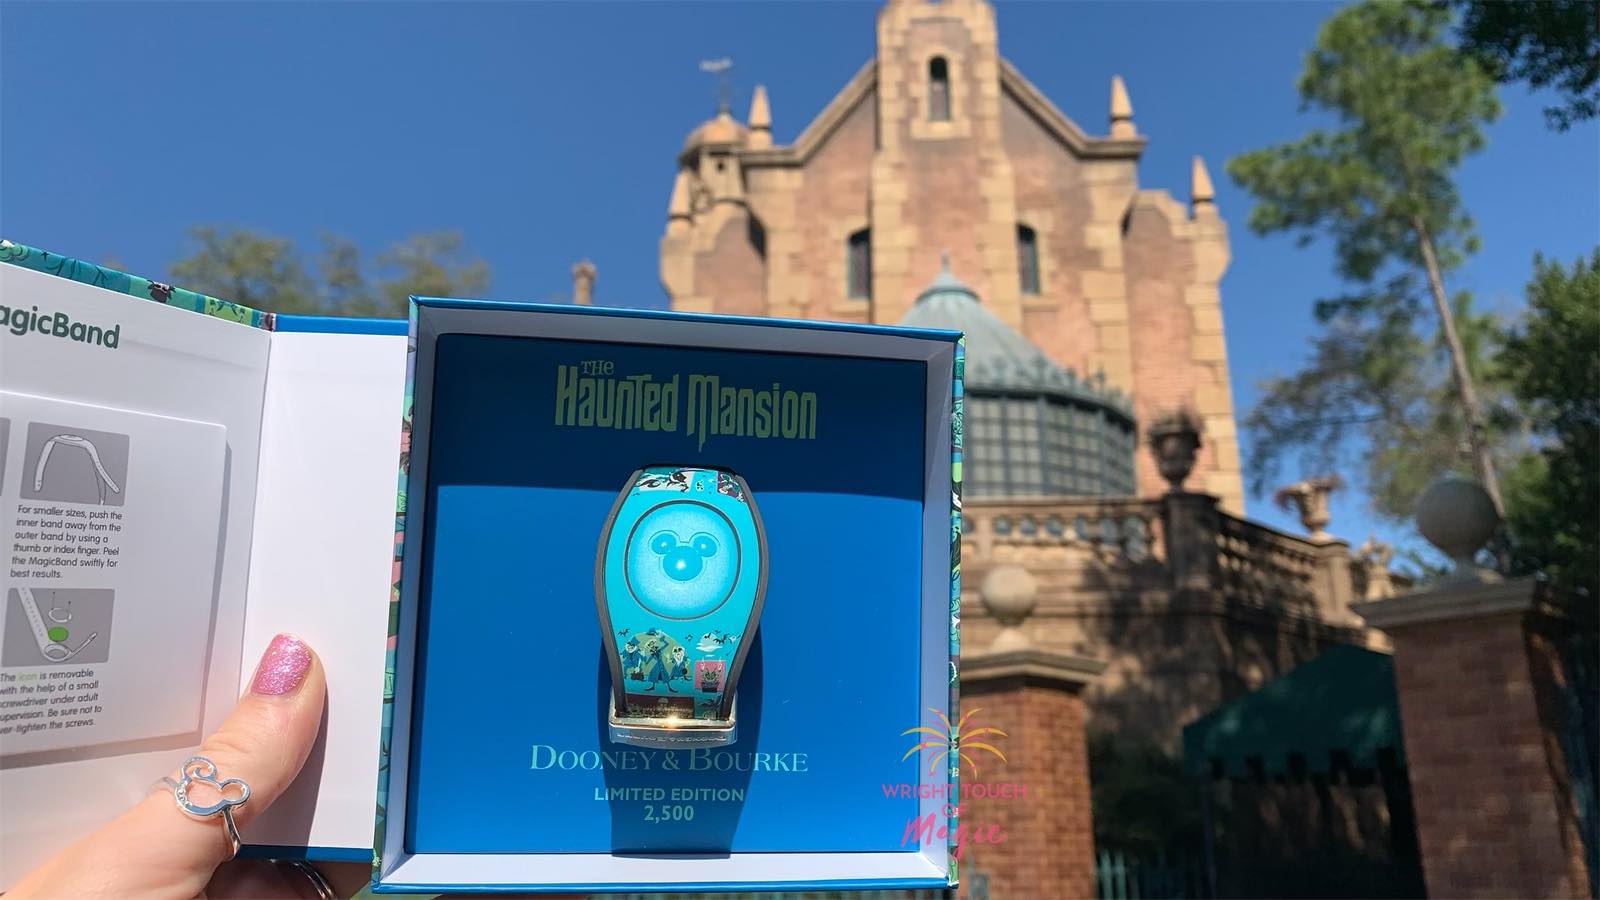 New Dooney & Bourke Haunted Mansion Magic Band materializes at the Magic Kingdom